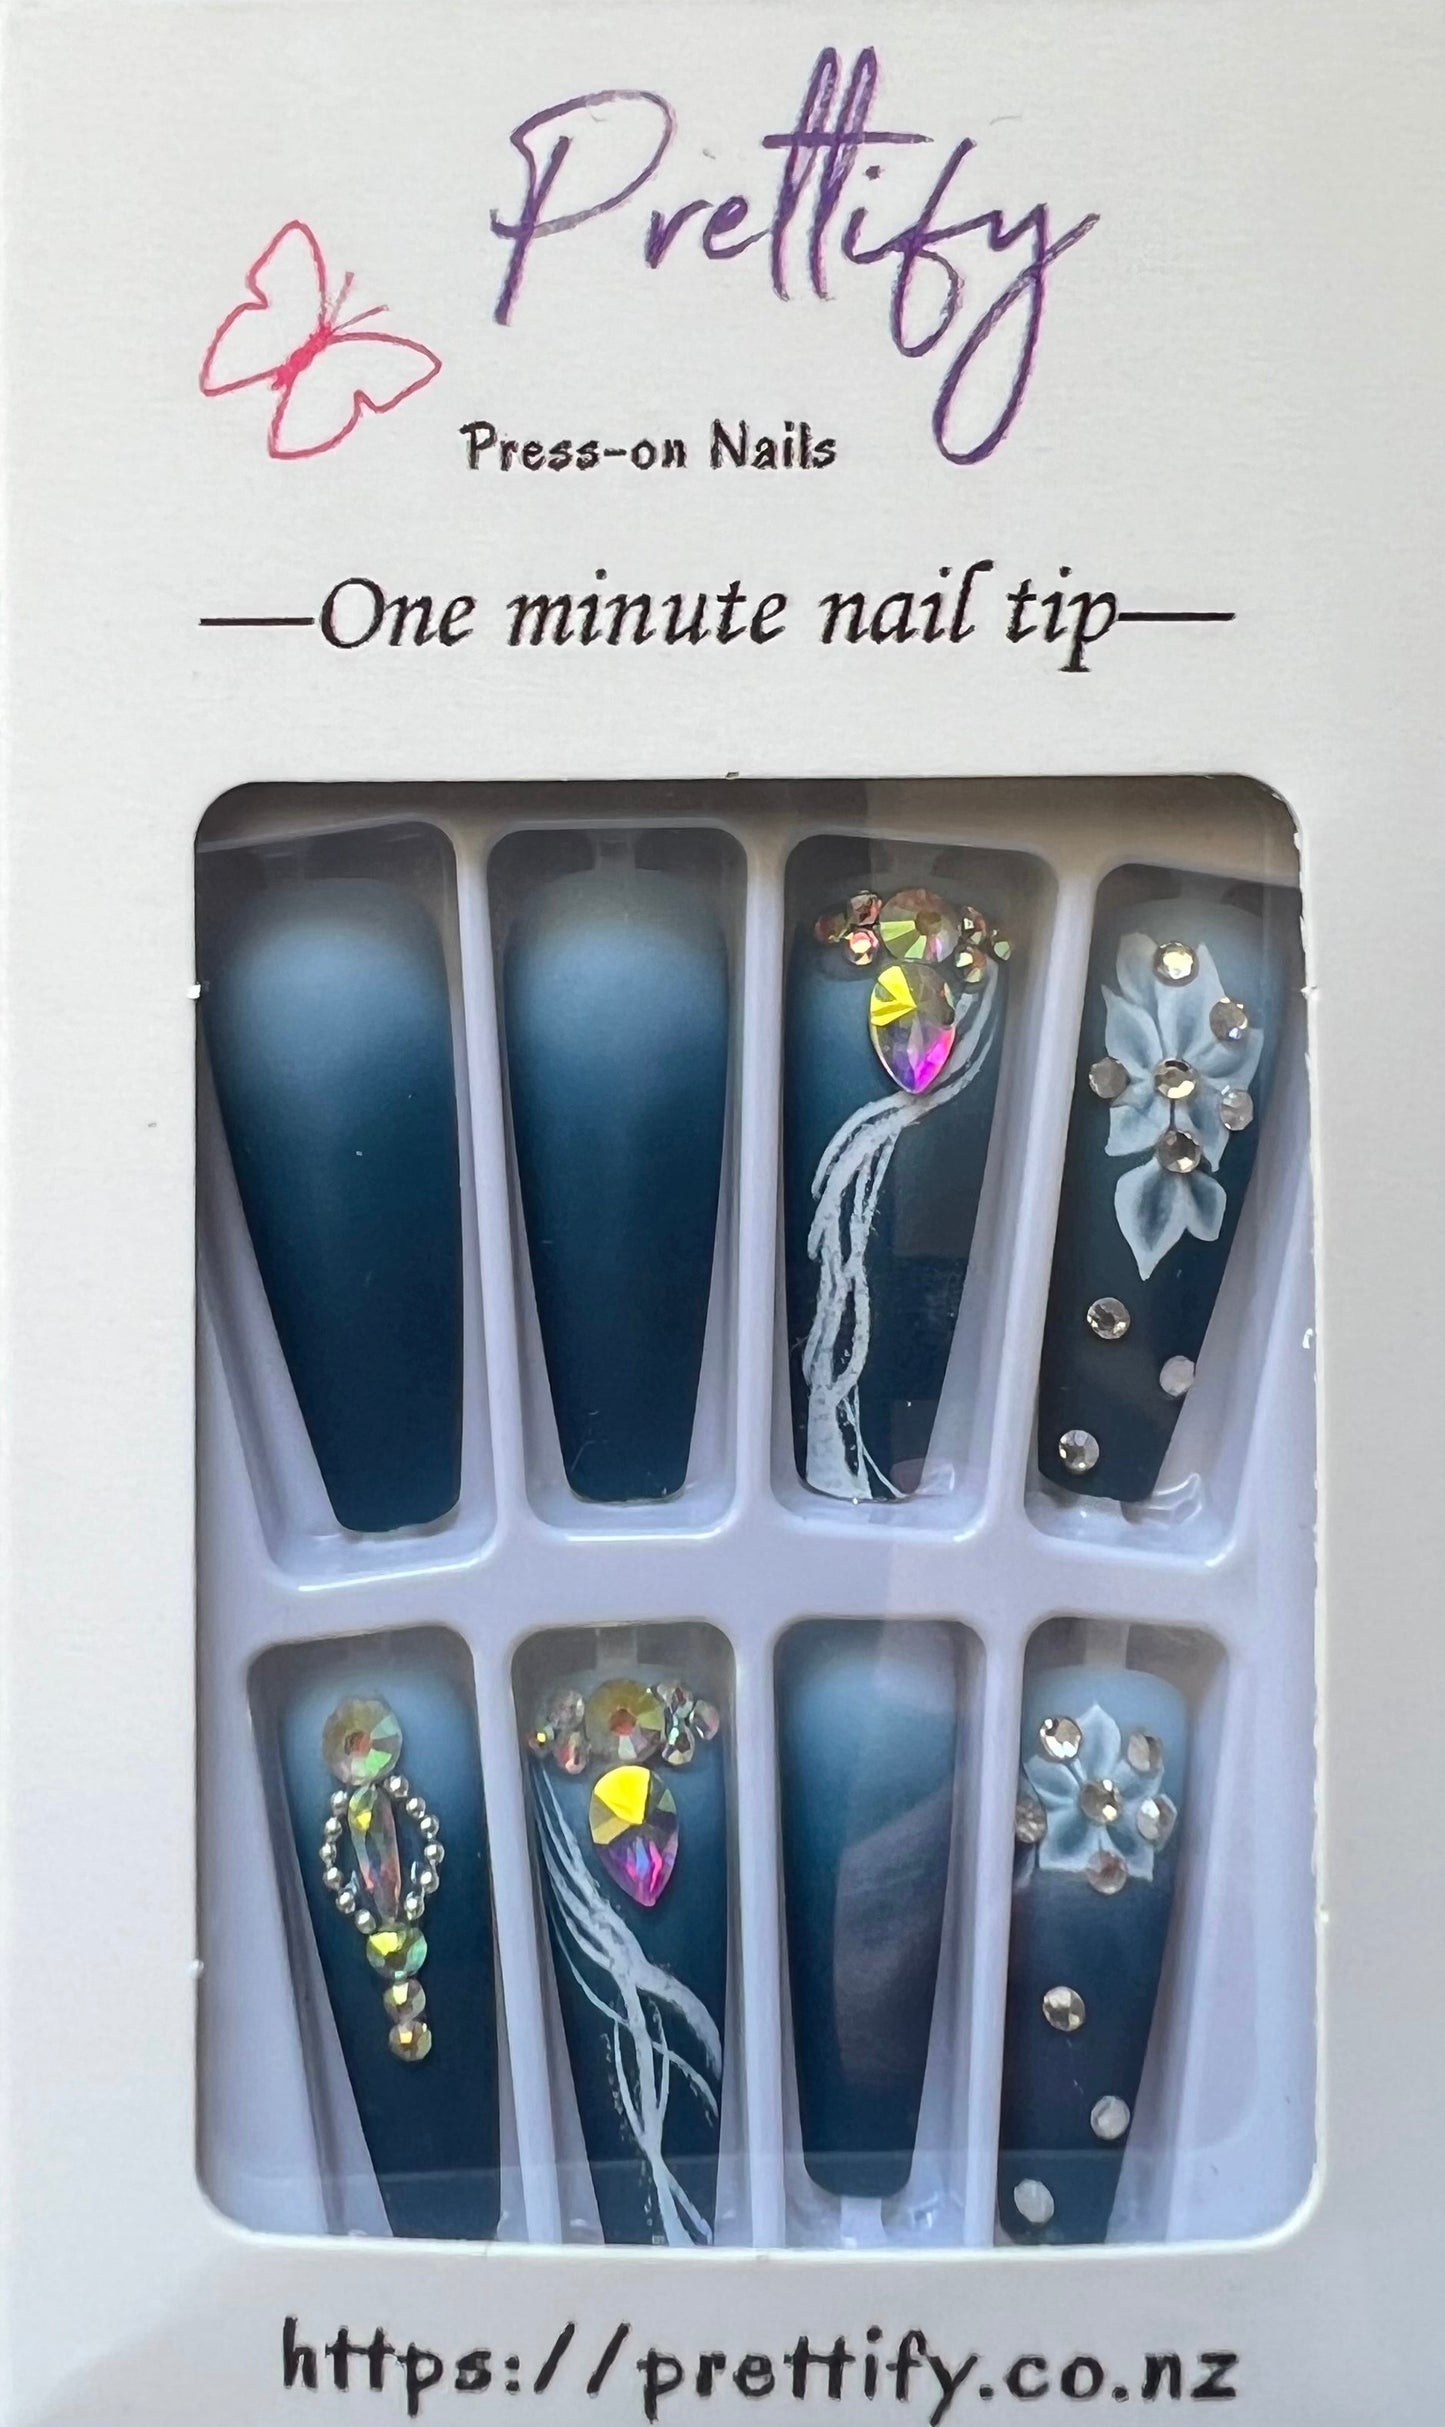 Midnight Blue & Pale Blue with White Flowers, Swirls & Jewels - Coffin Press on Nails #BKS1544